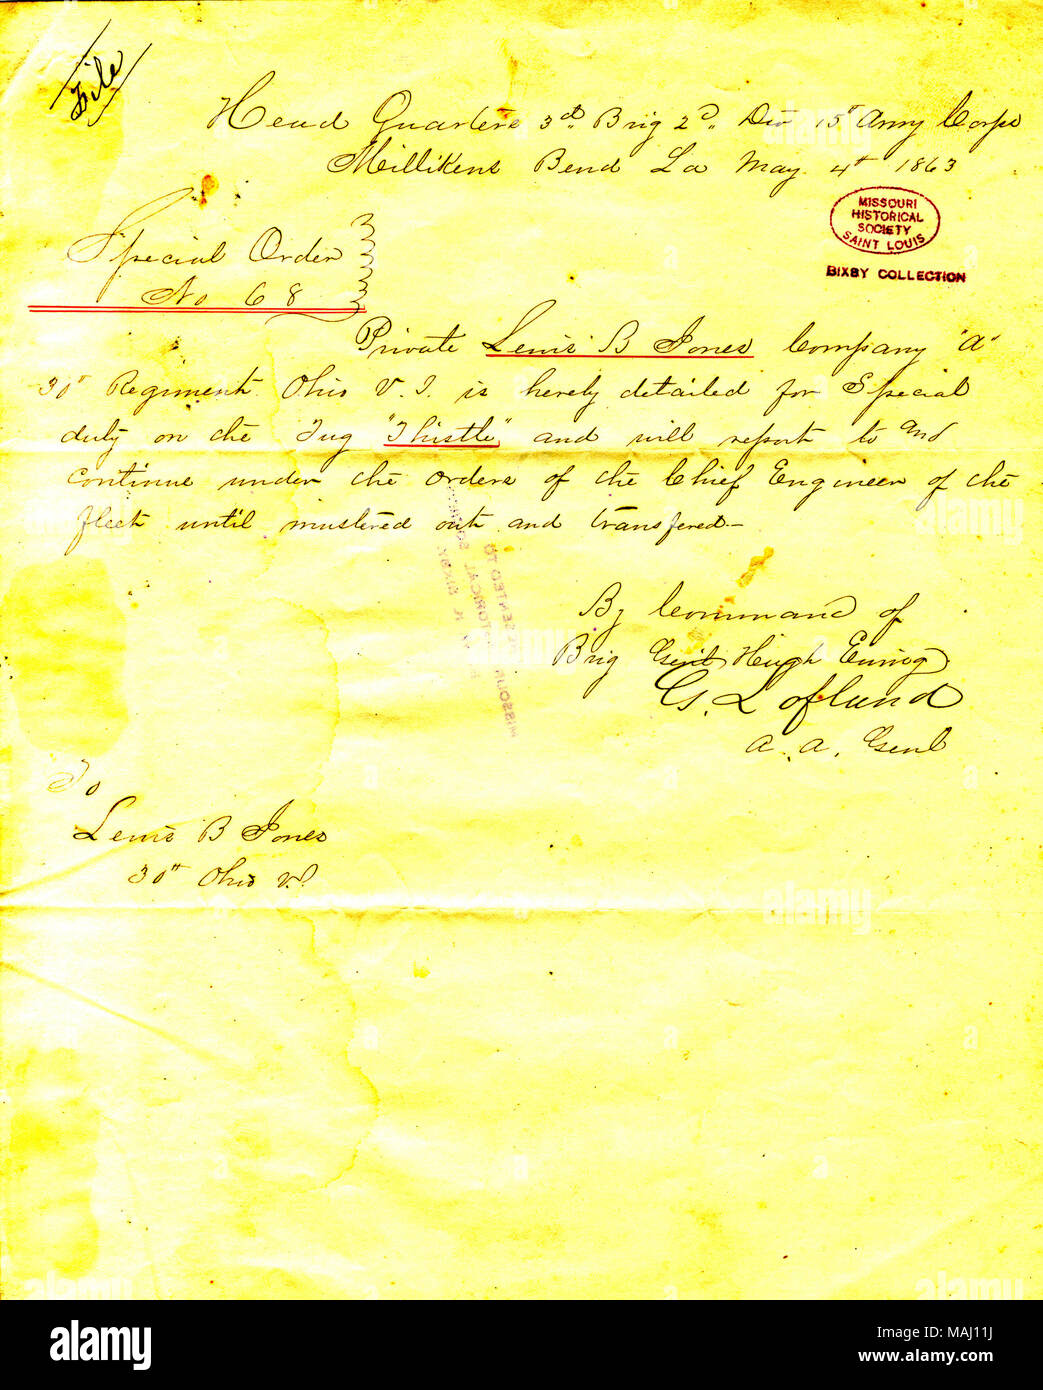 Details Private Lewis B. Jones, Company A, 30th Ohio Infantry, for special duty on the tug Thistle. Title: Special Order No. 68, headquarters, 3rd Brigade, 2nd Division, 15th Army Corps, Milliken's Bend, Louisiana, May 4, 1863  . 4 May 1863. Stock Photo